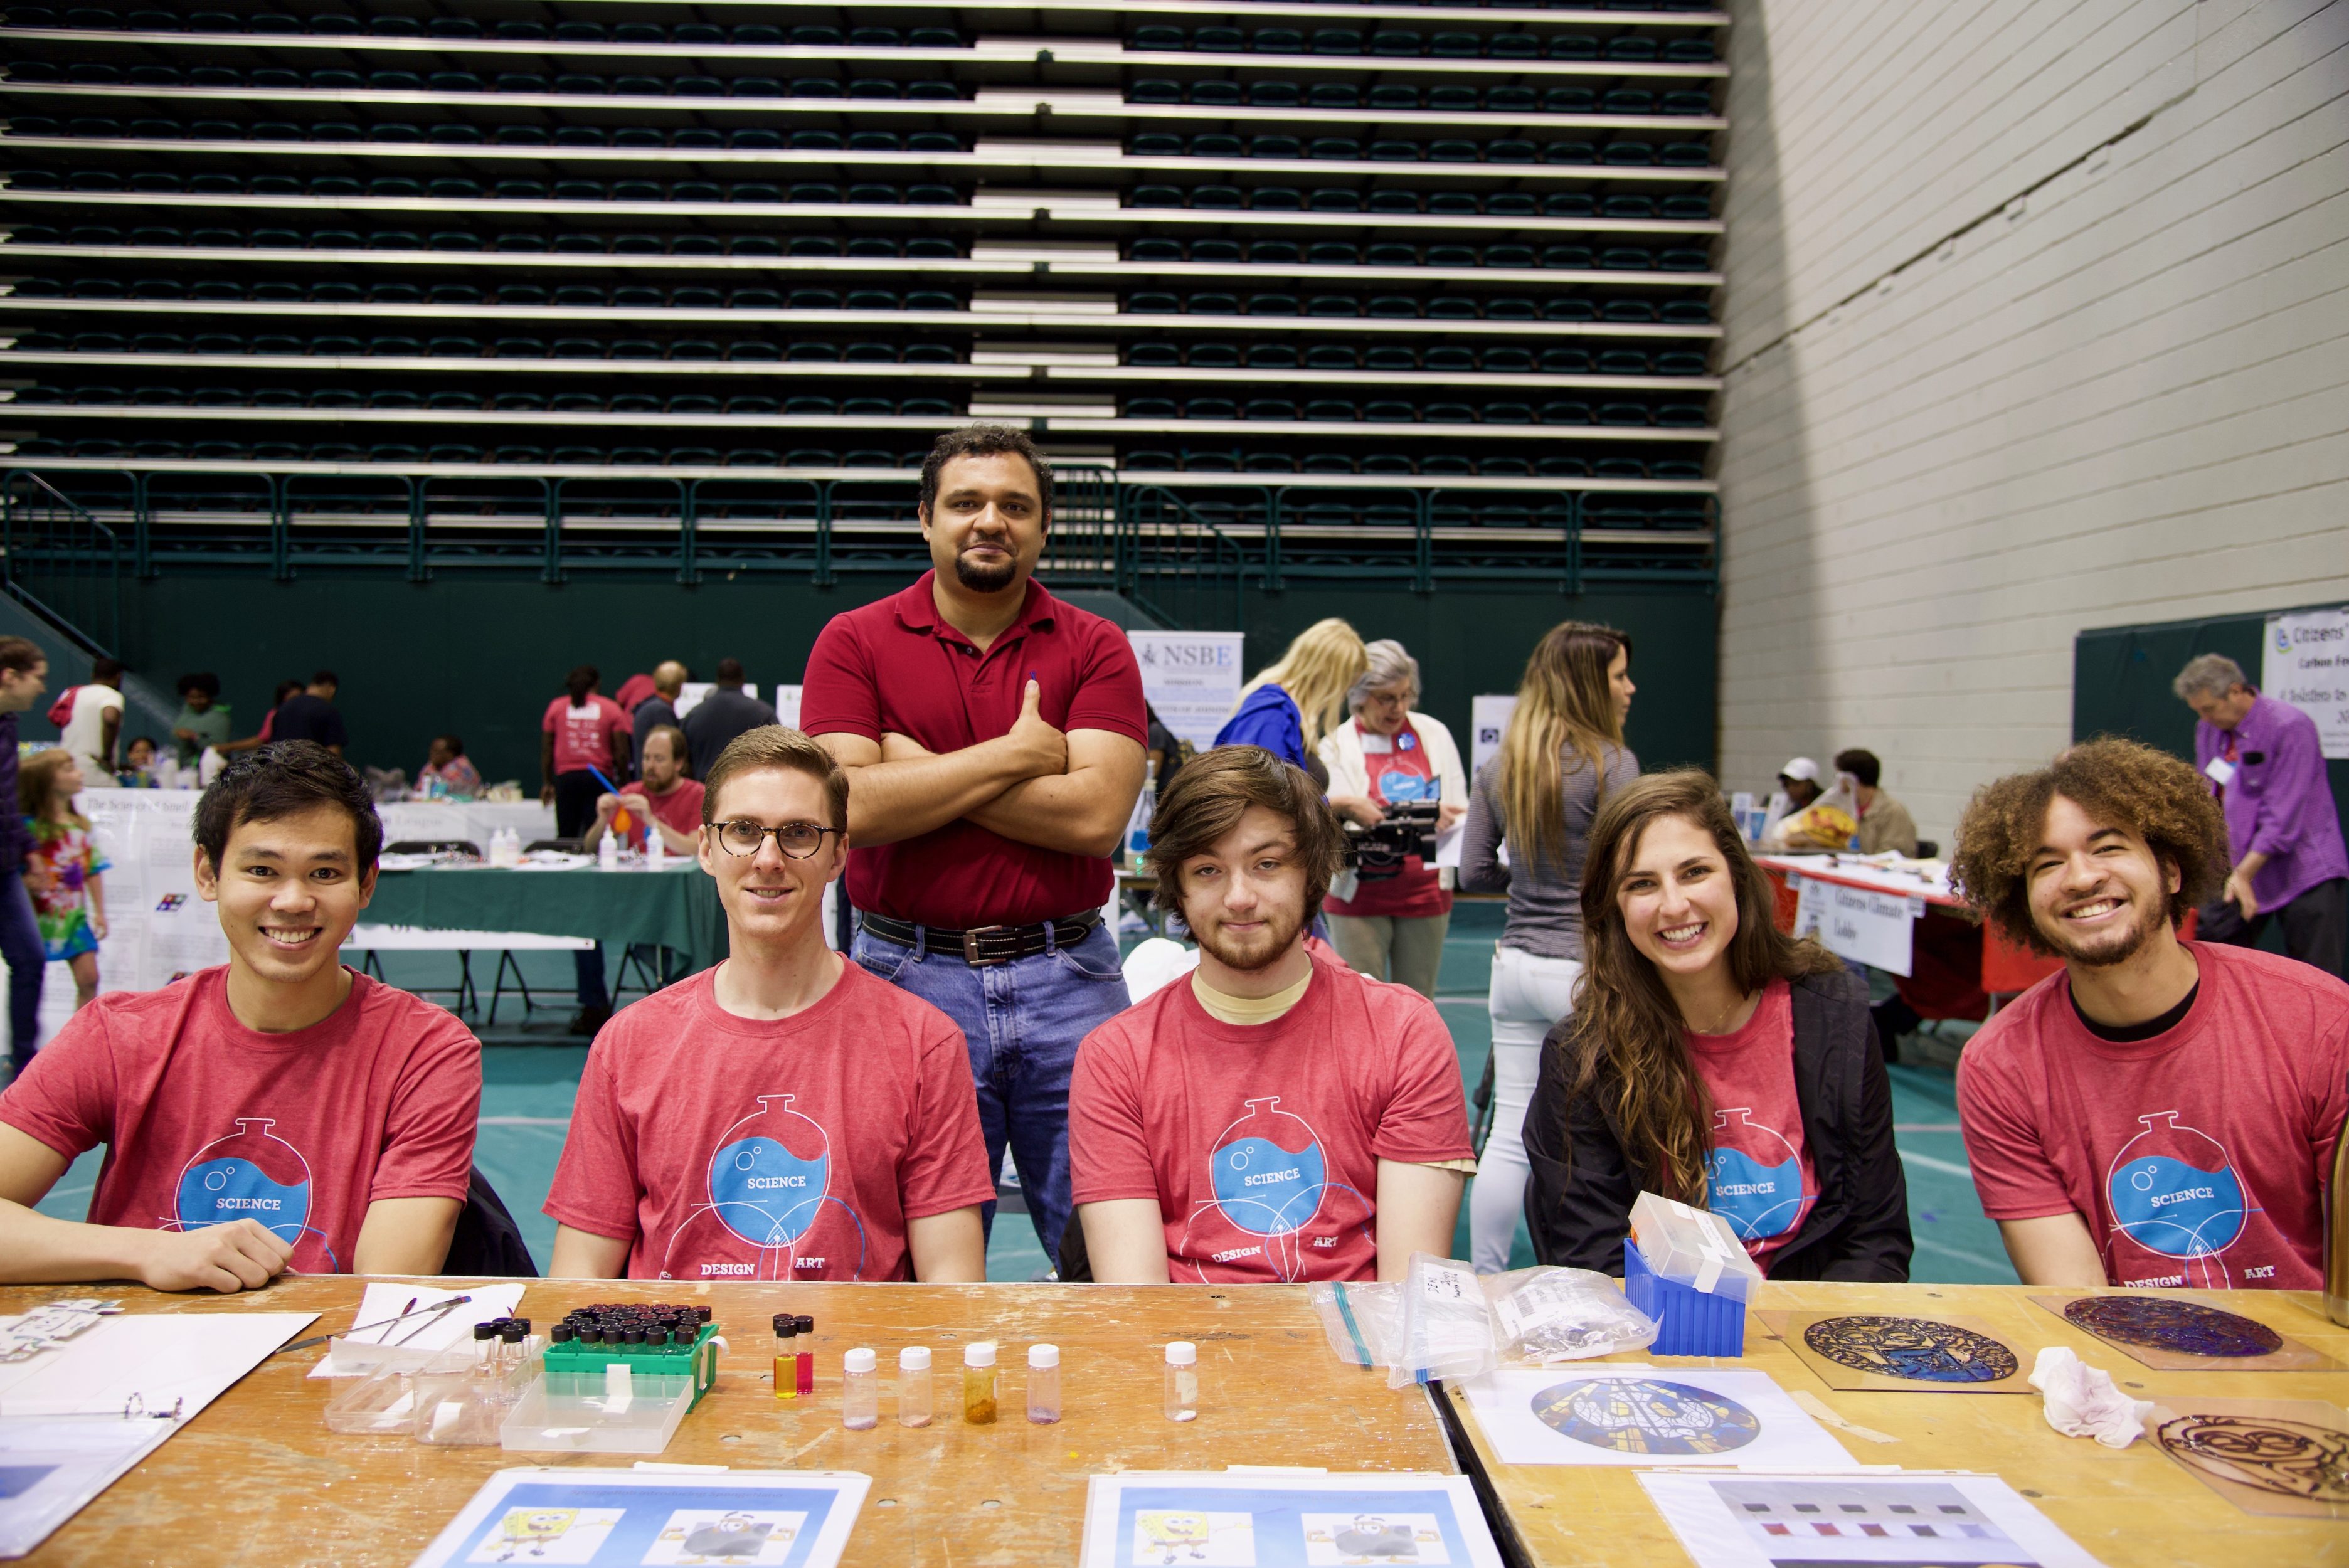 Juan Luis Vivero-Escoto (standing) and his students volunteer at the UNC Charlotte Science and Technology Expo.